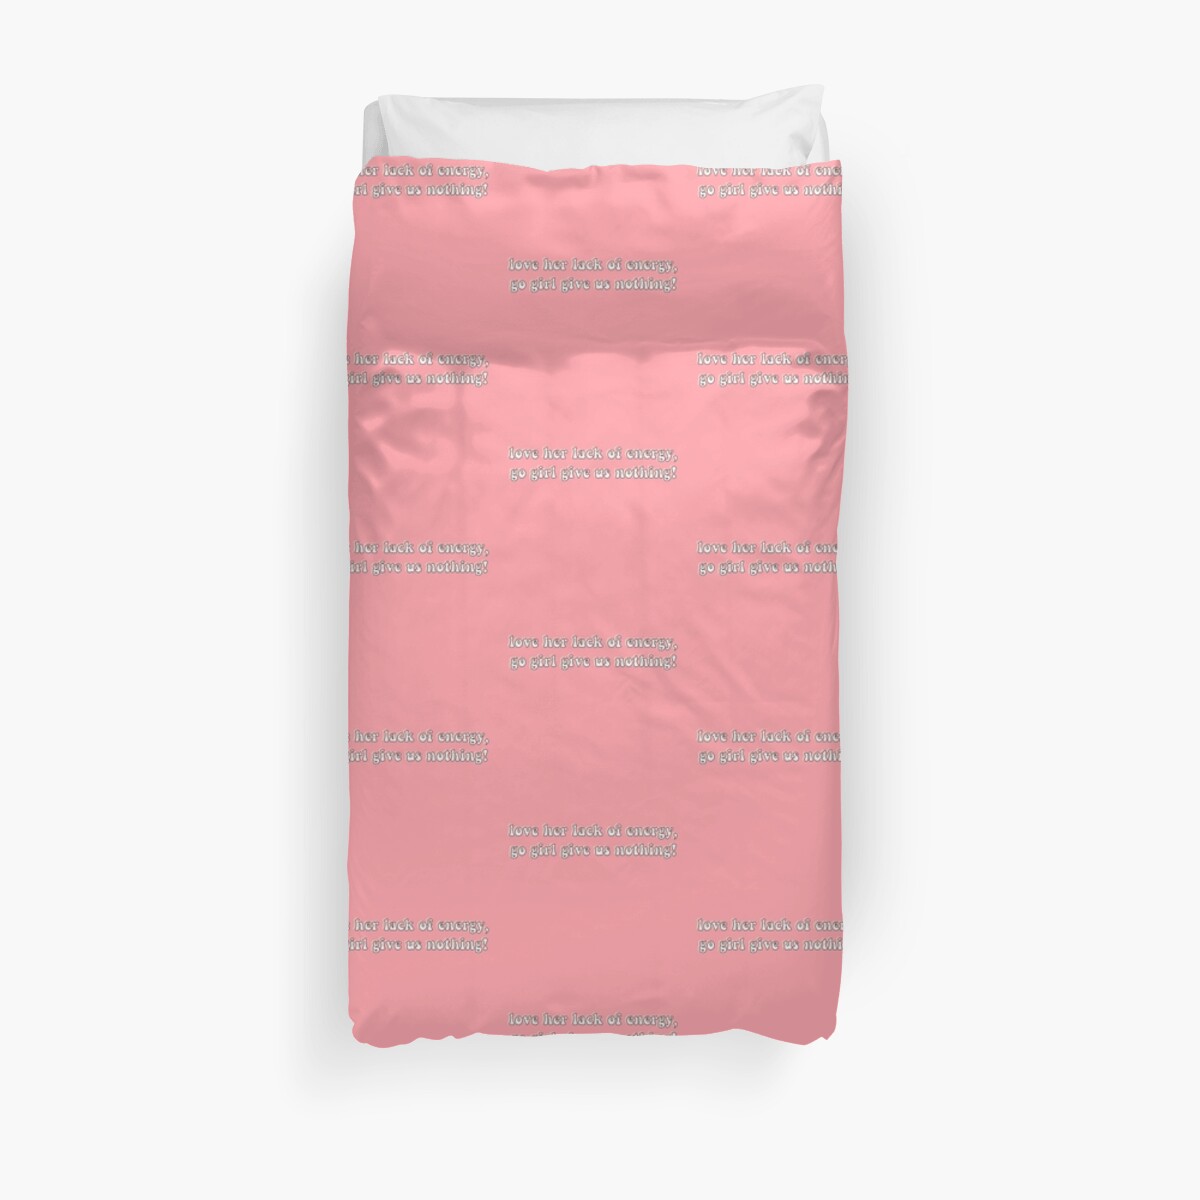 Love Her Lack Of Energy Go Girl Give Us Nothing Duvet Cover By Chloecreates Redbubble